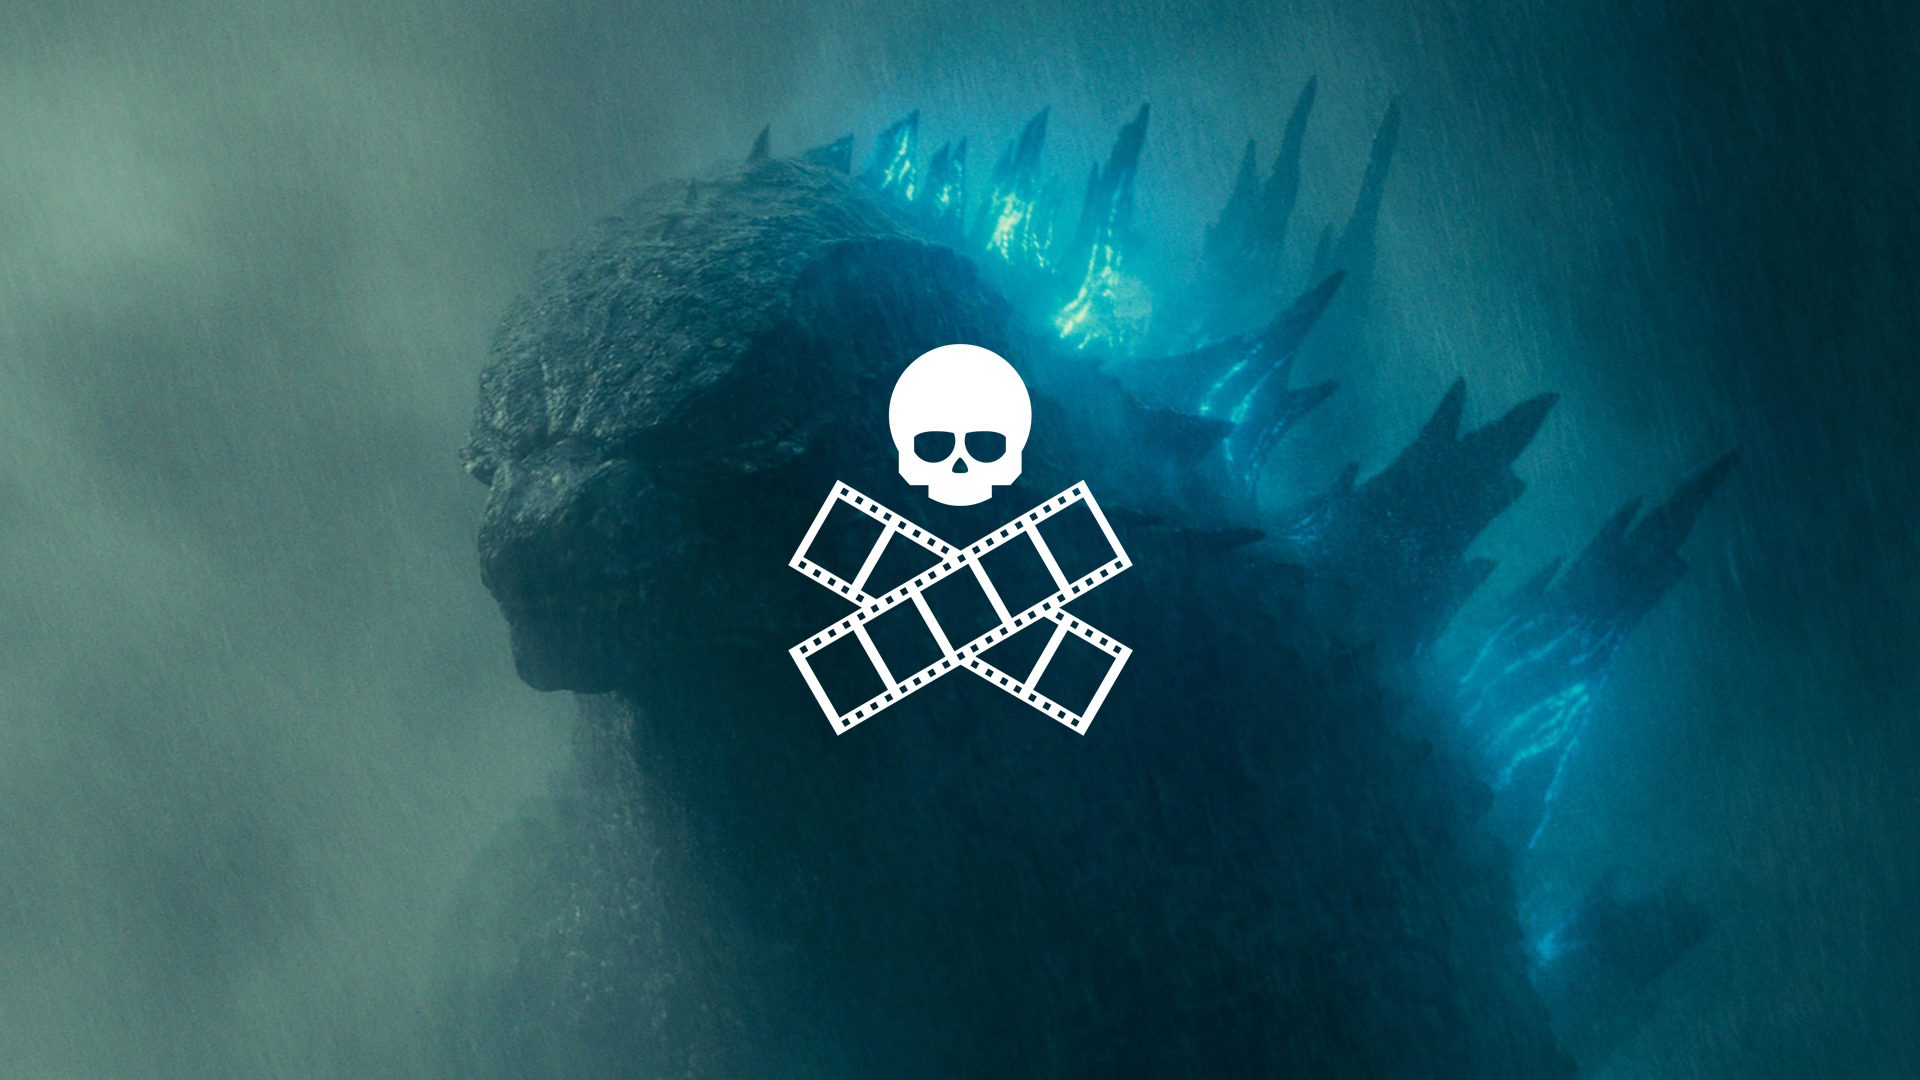 144. Godzilla King of the Monsters